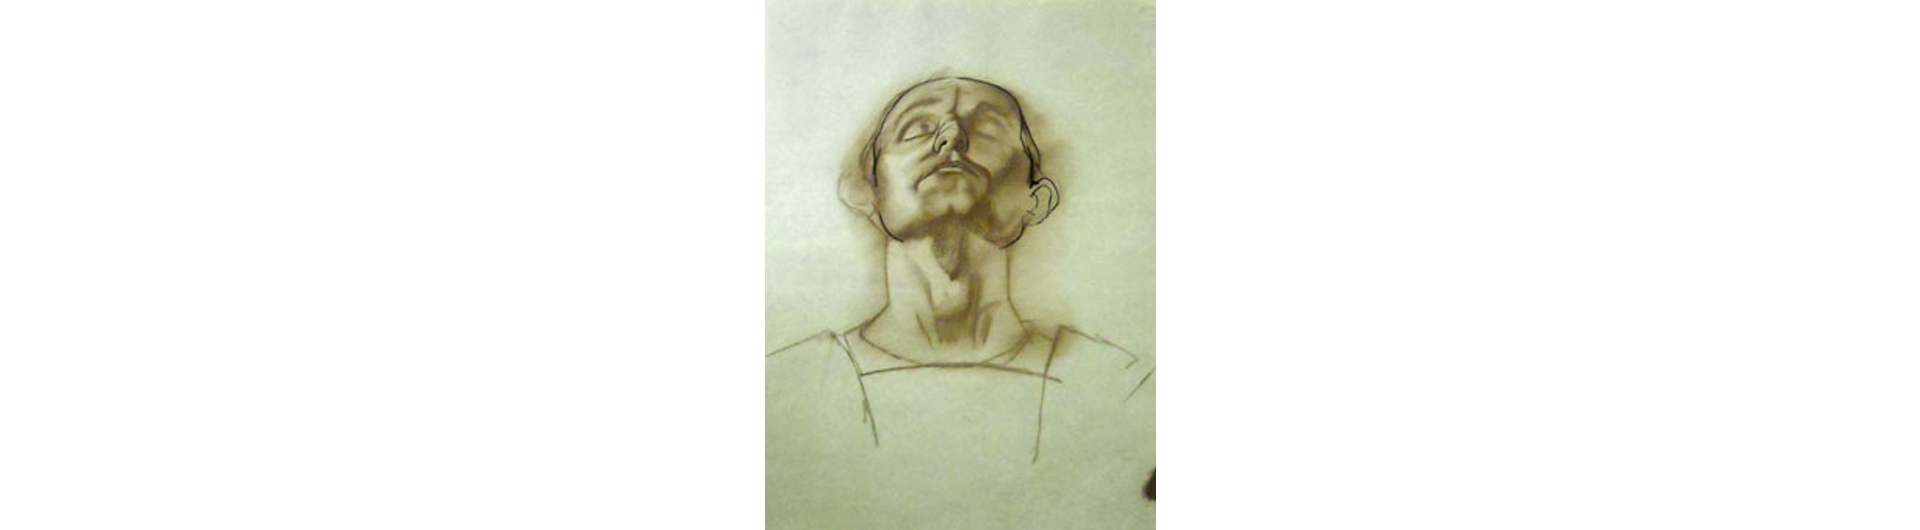 Figurative Drawing drawing of a man with eyes closed looking upward